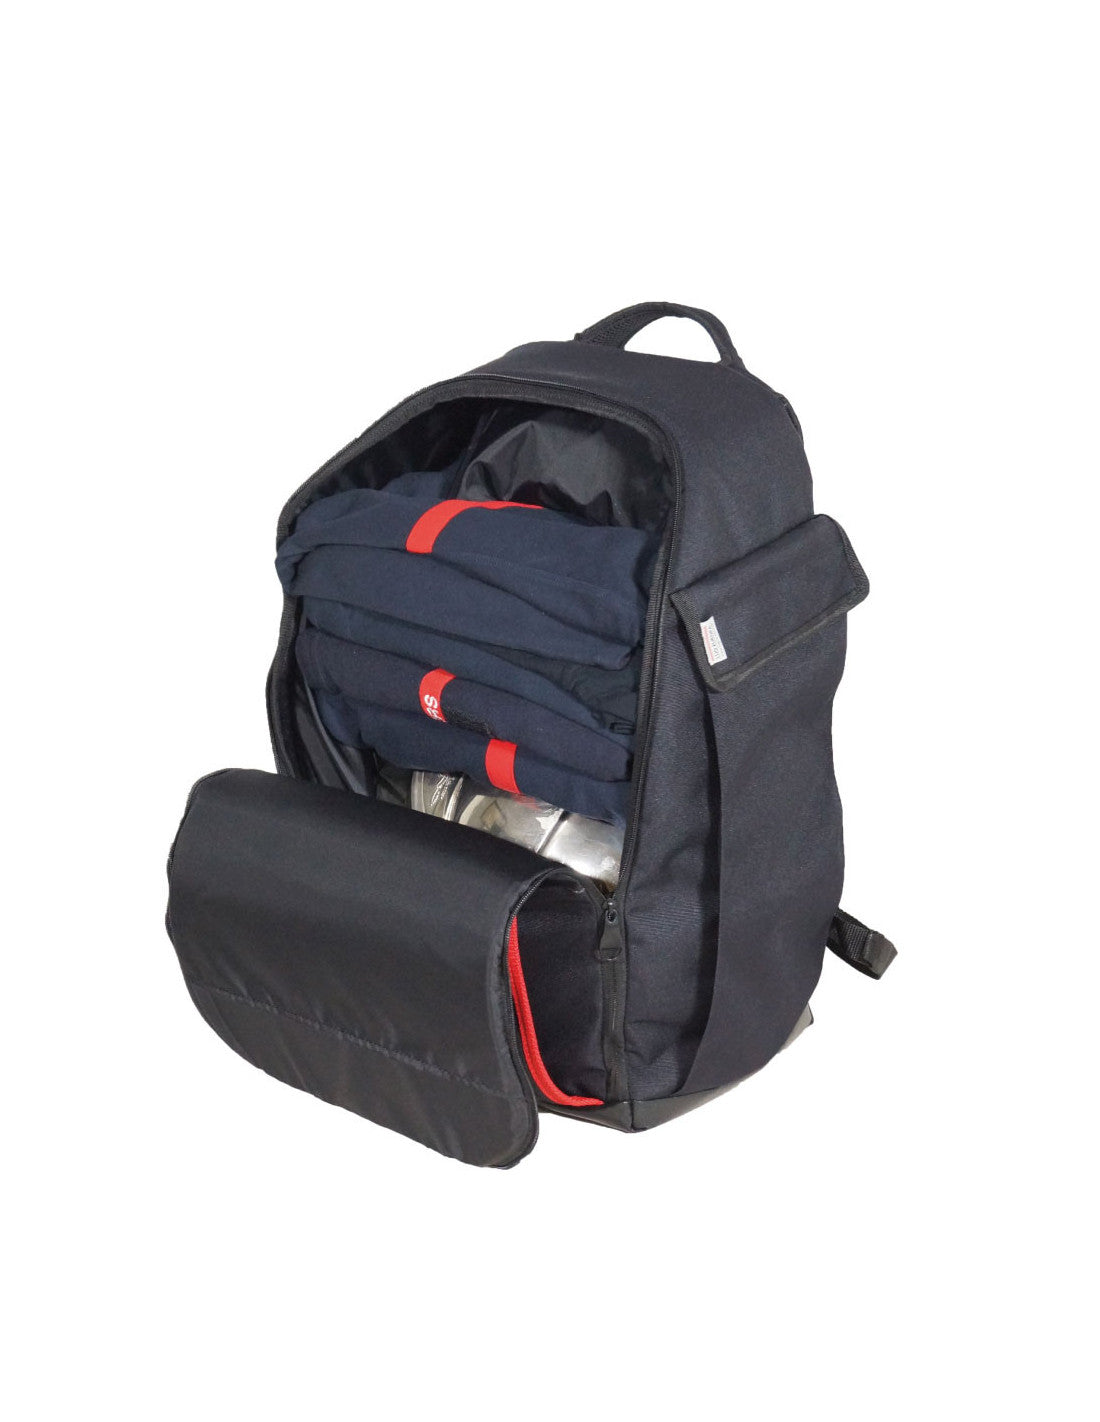 Intervention backpack - 500773